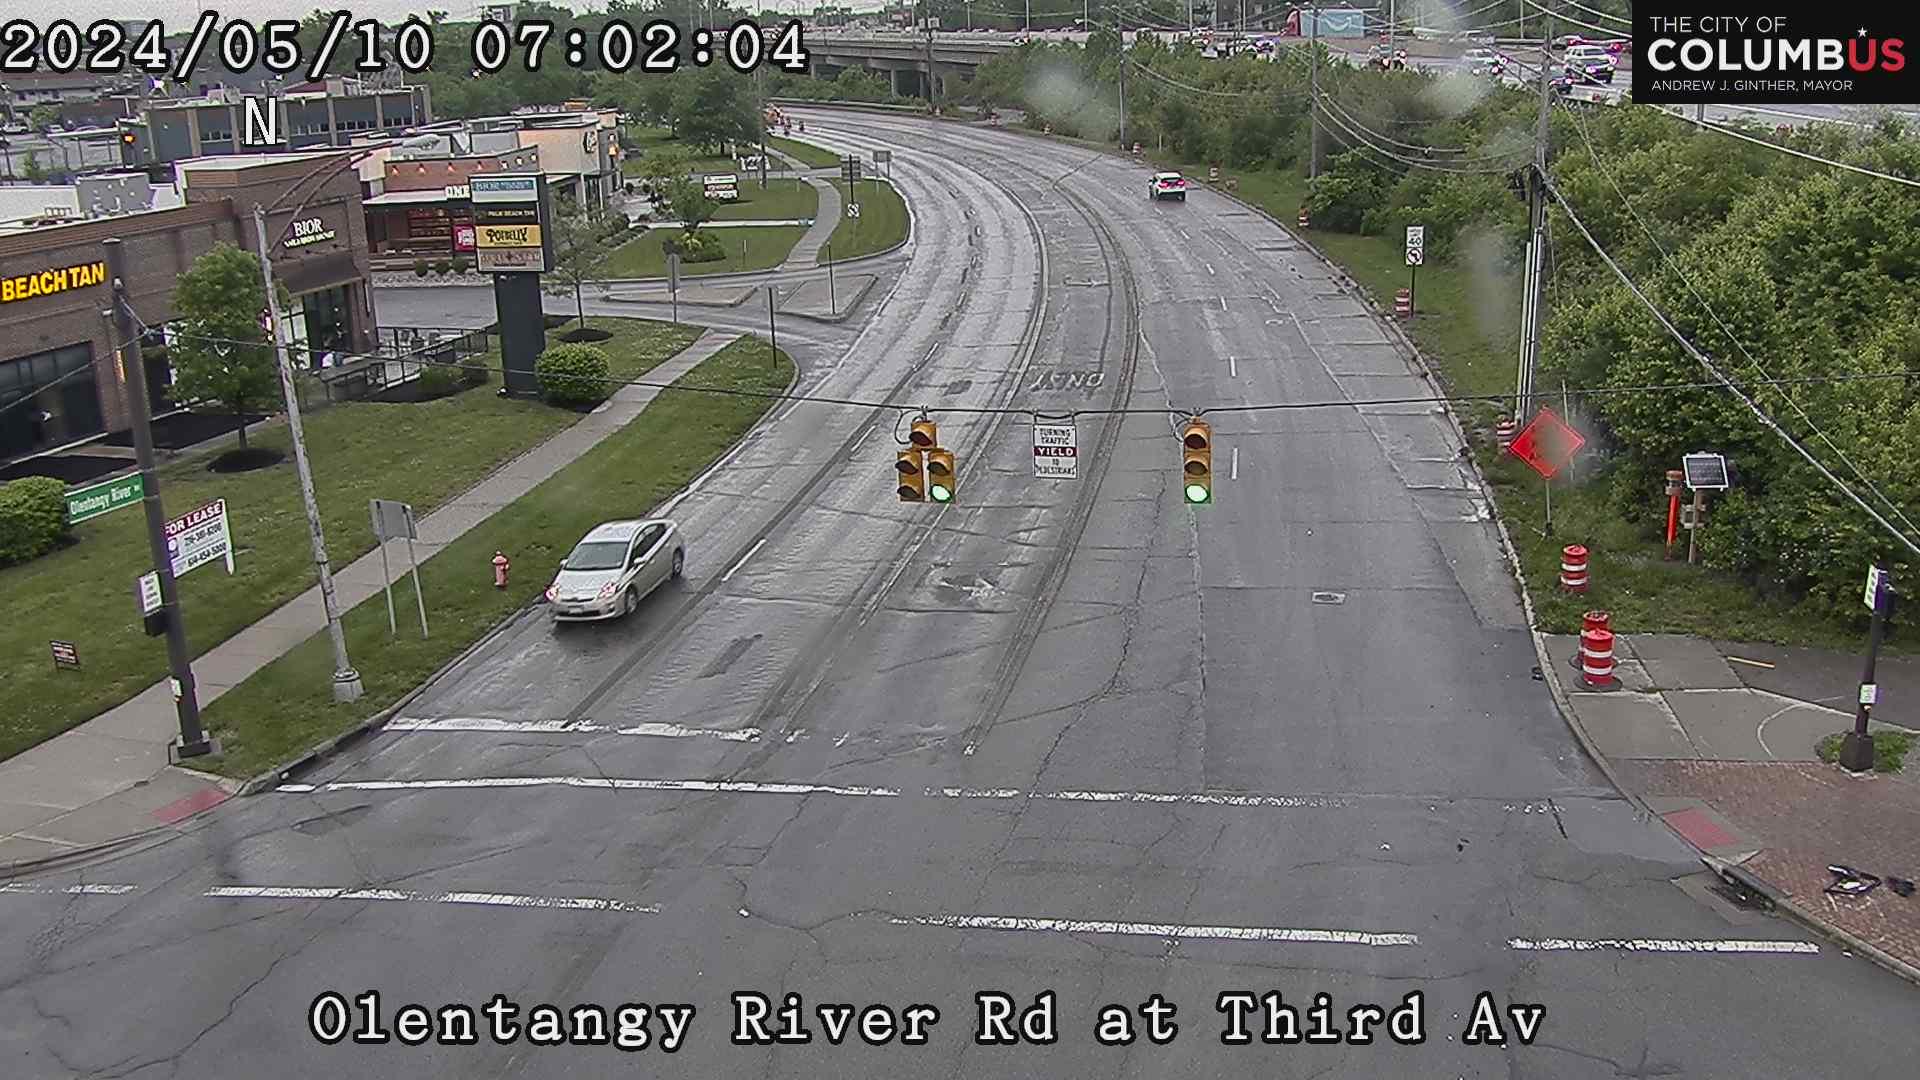 Traffic Cam Harrison West: City of Columbus) Olentangy River Rd at Third Ave Player